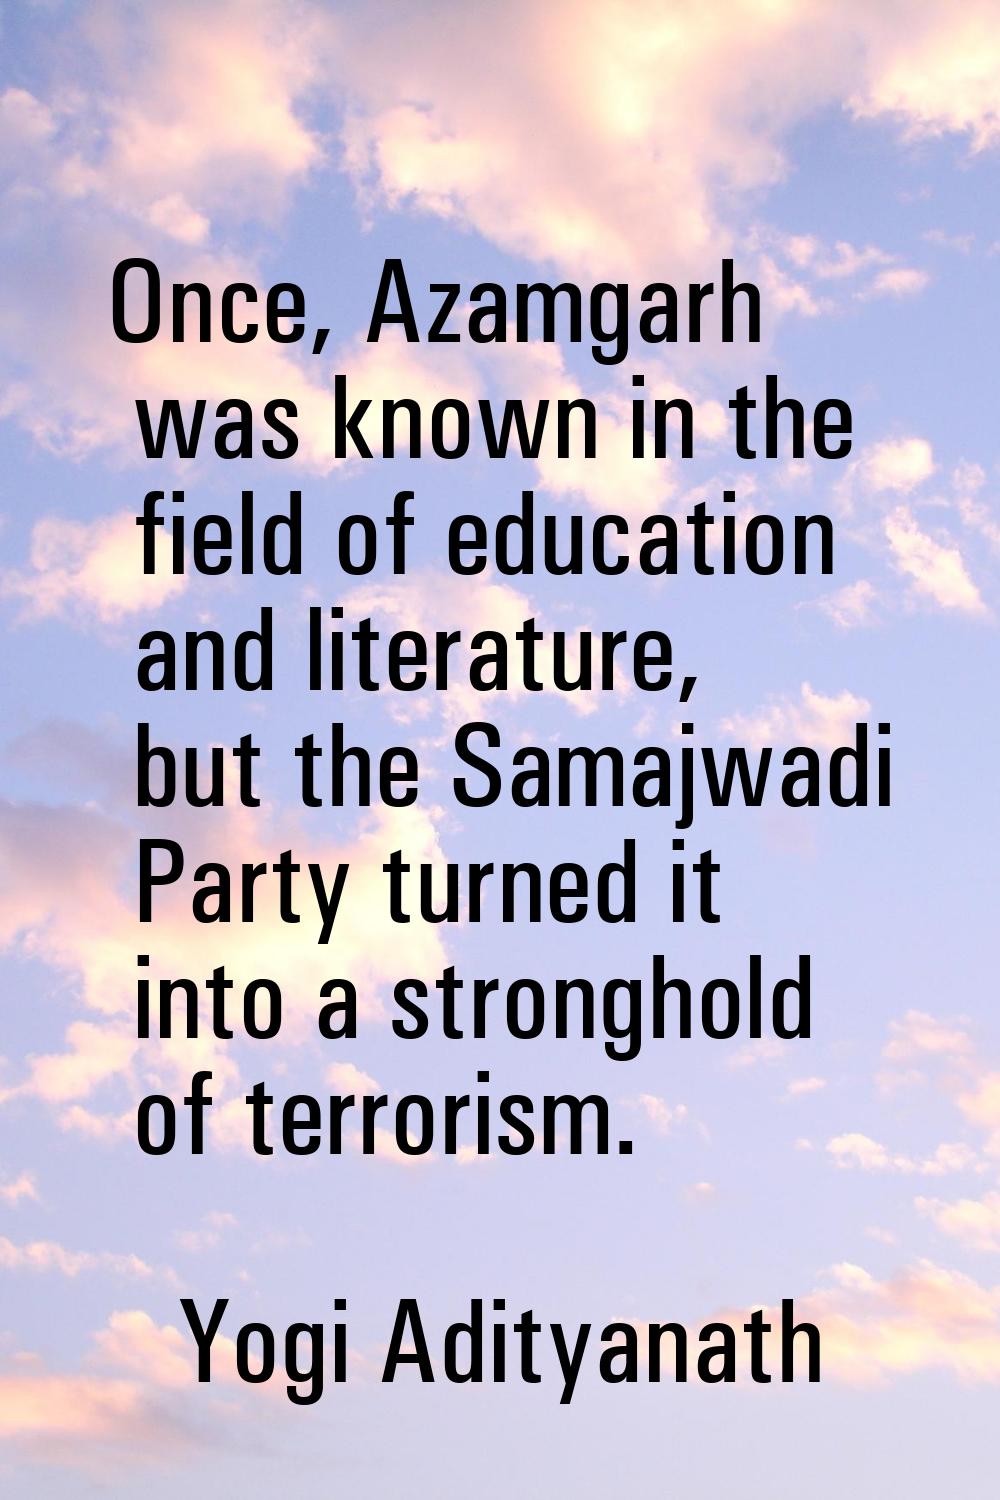 Once, Azamgarh was known in the field of education and literature, but the Samajwadi Party turned i